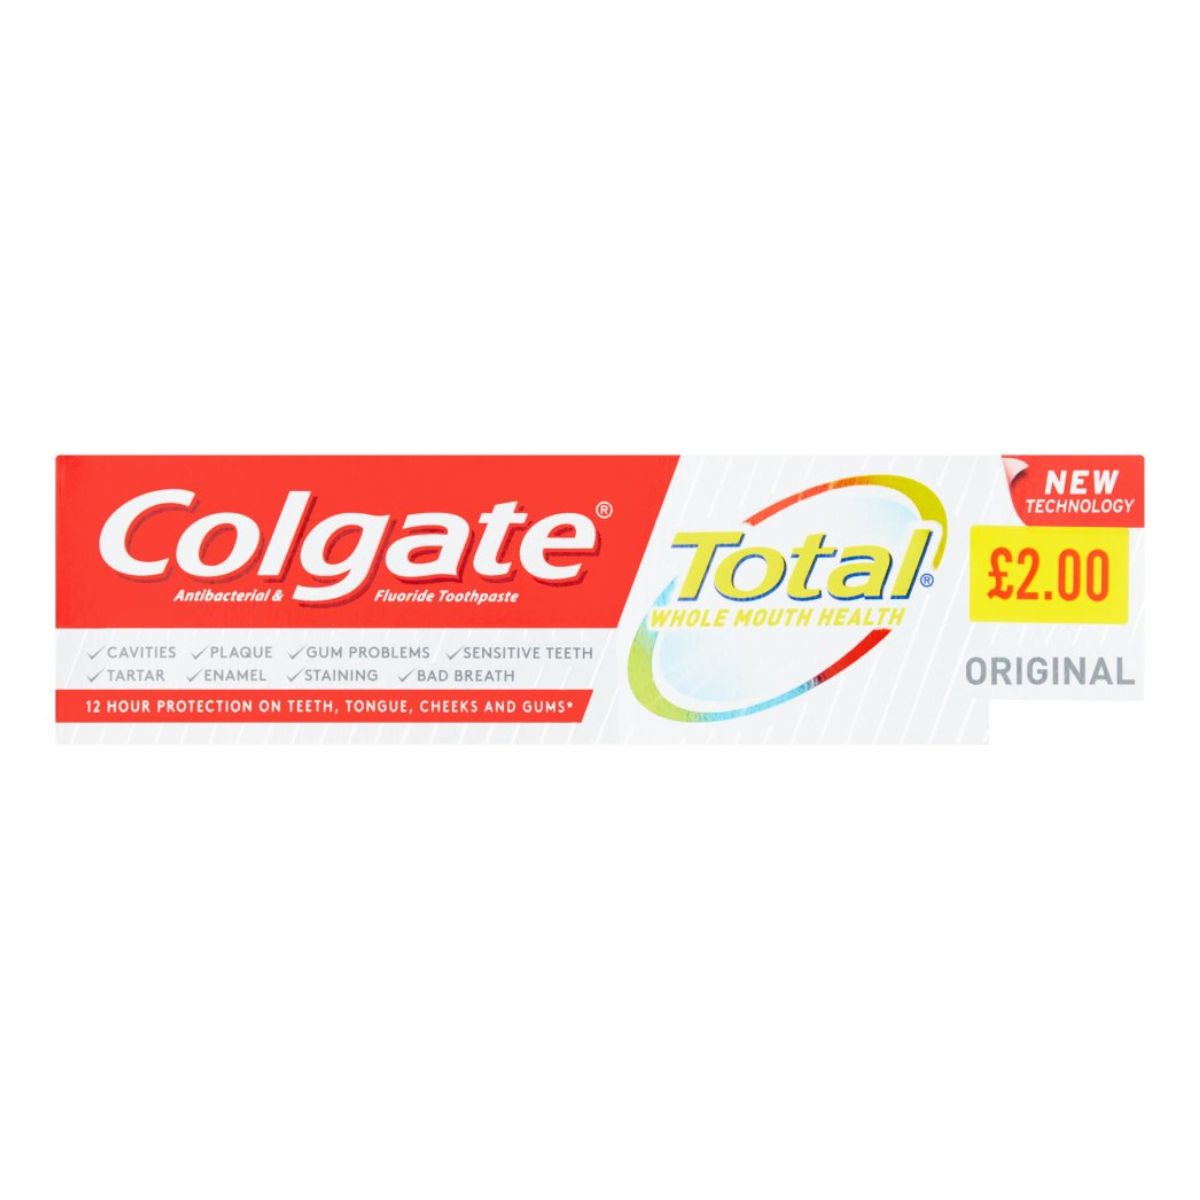 Colgate - Total Whole Mouth Health Original Toothpaste - 75ml - 200ml.